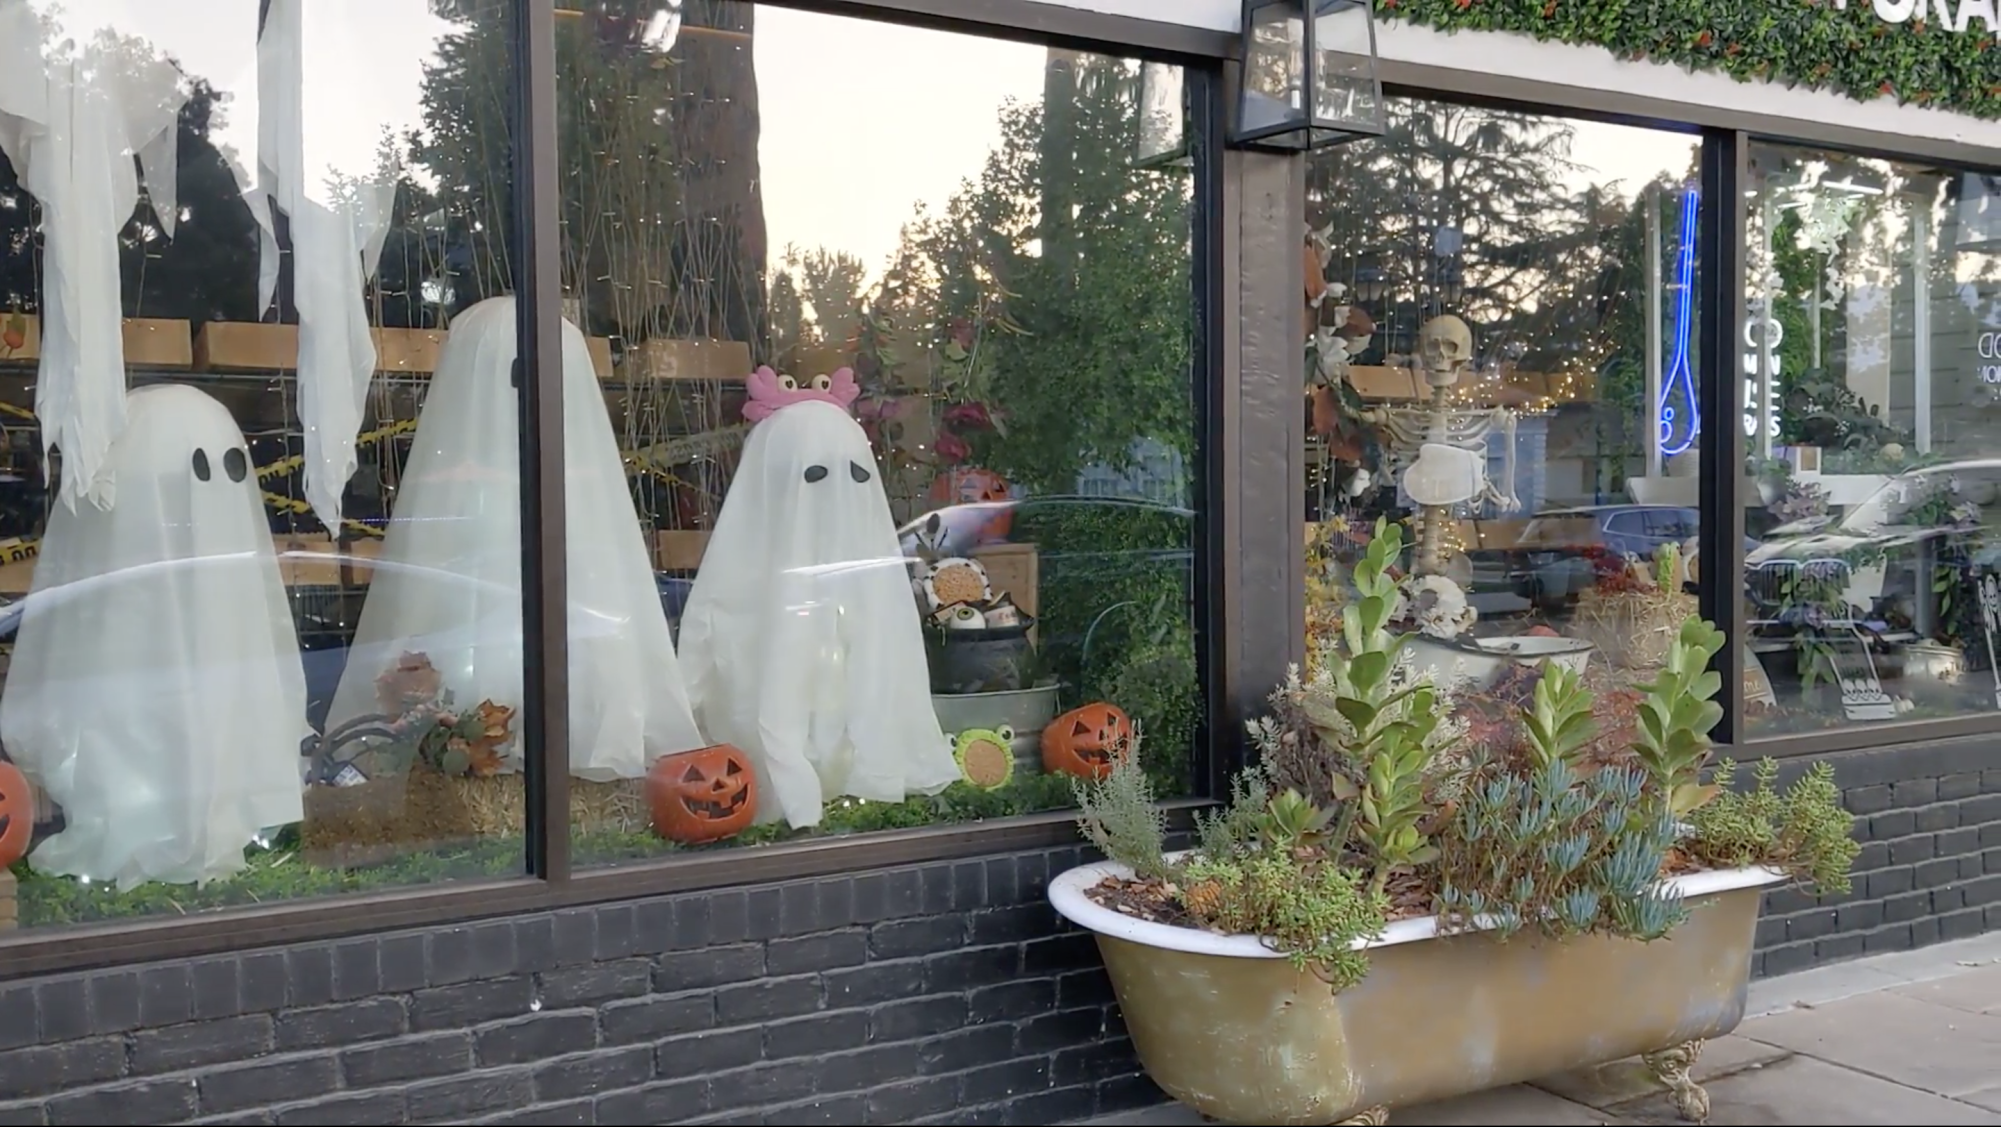 Spooky+storefronts%3A+Downtown+businesses+embrace+Halloween+spirit